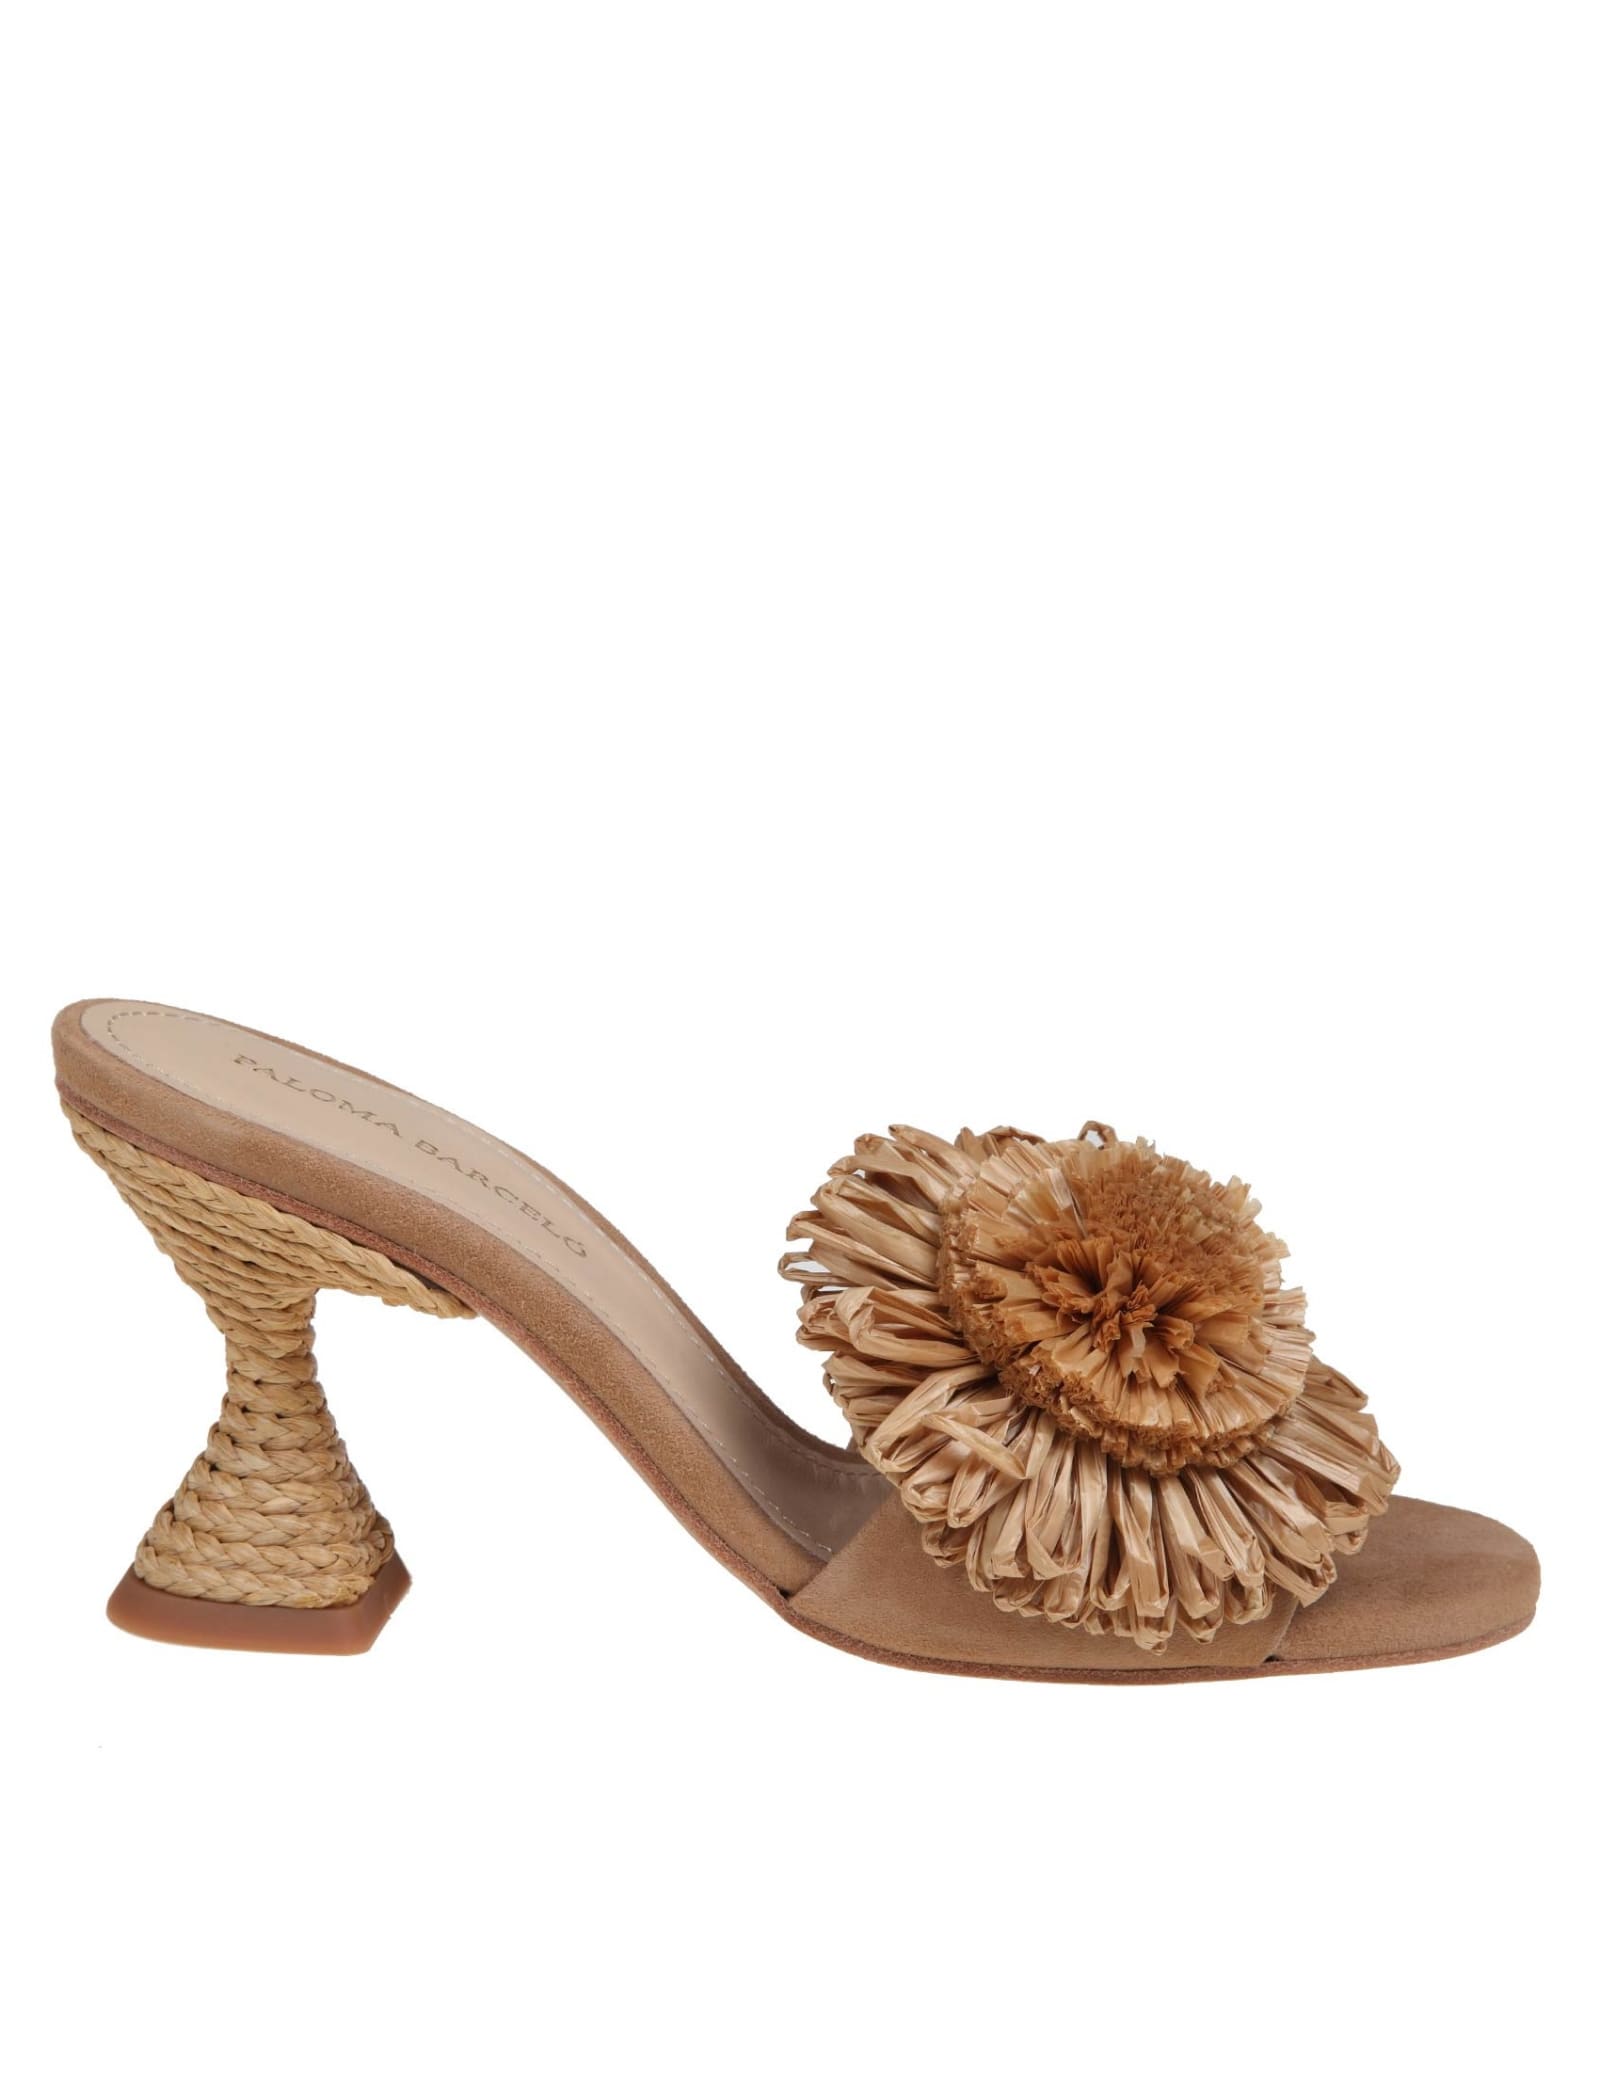 Paloma Barceló Akira Mules In Suede With Raffia Bow